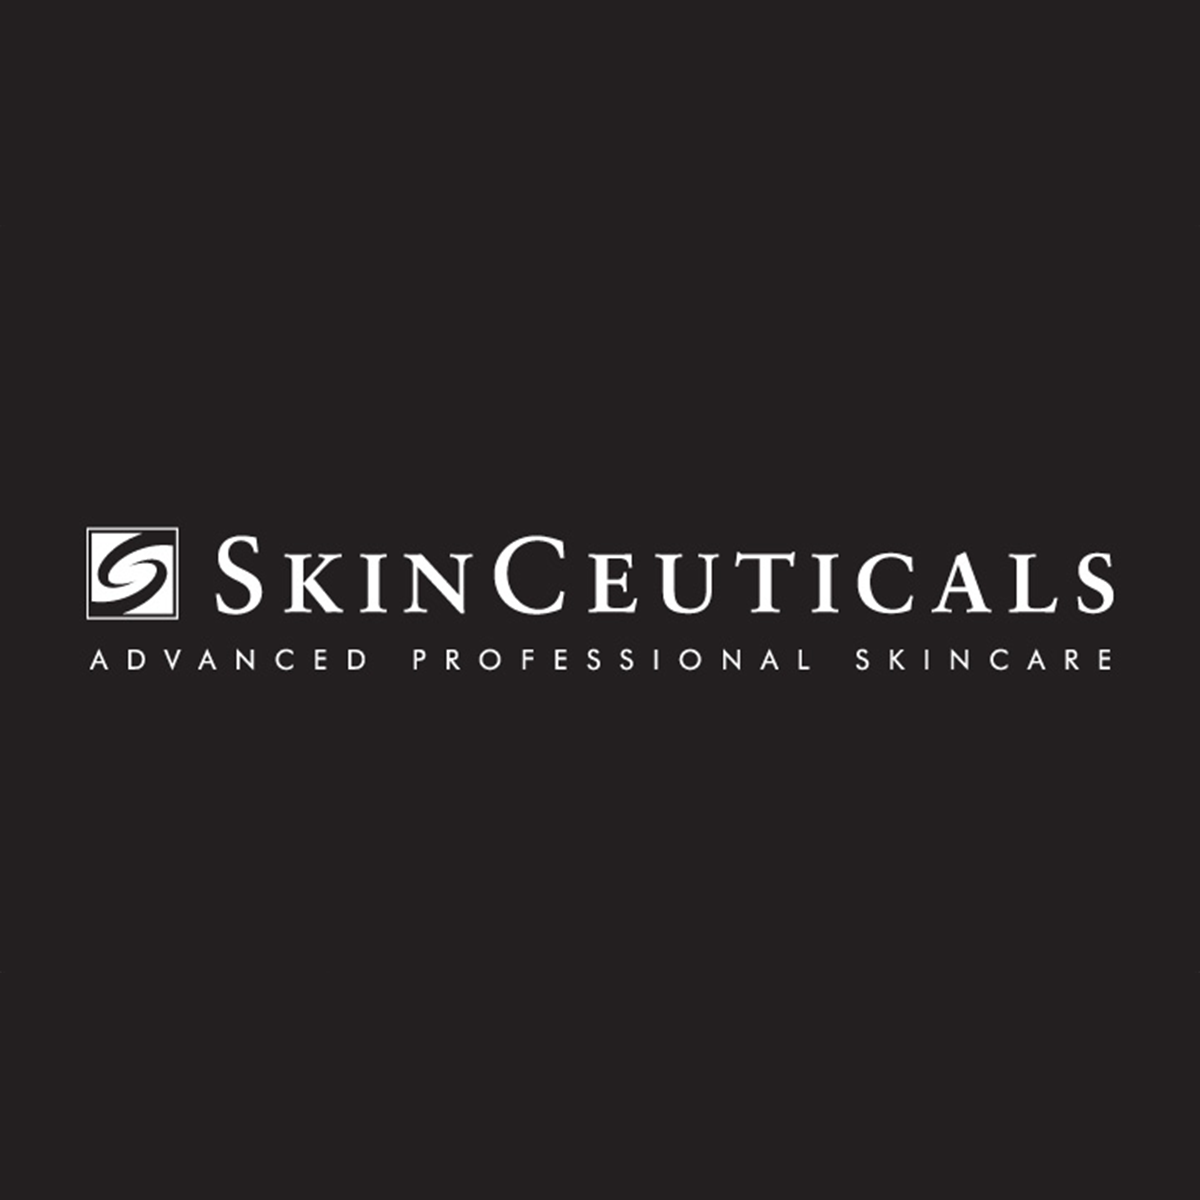 Working with SkinCeuticals